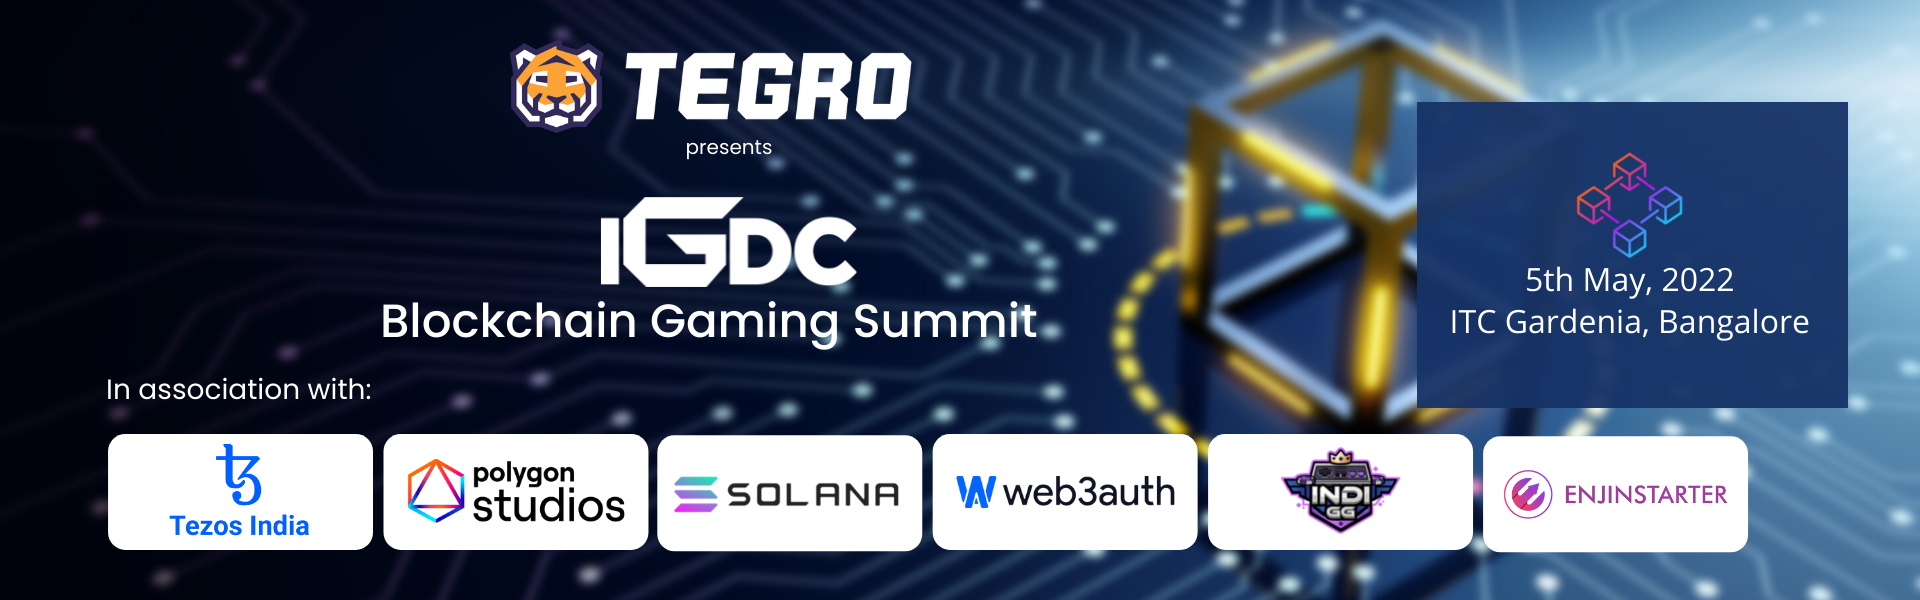 IGDC Unveils The First Edition of ‘The Blockchain Gaming Summit 2022